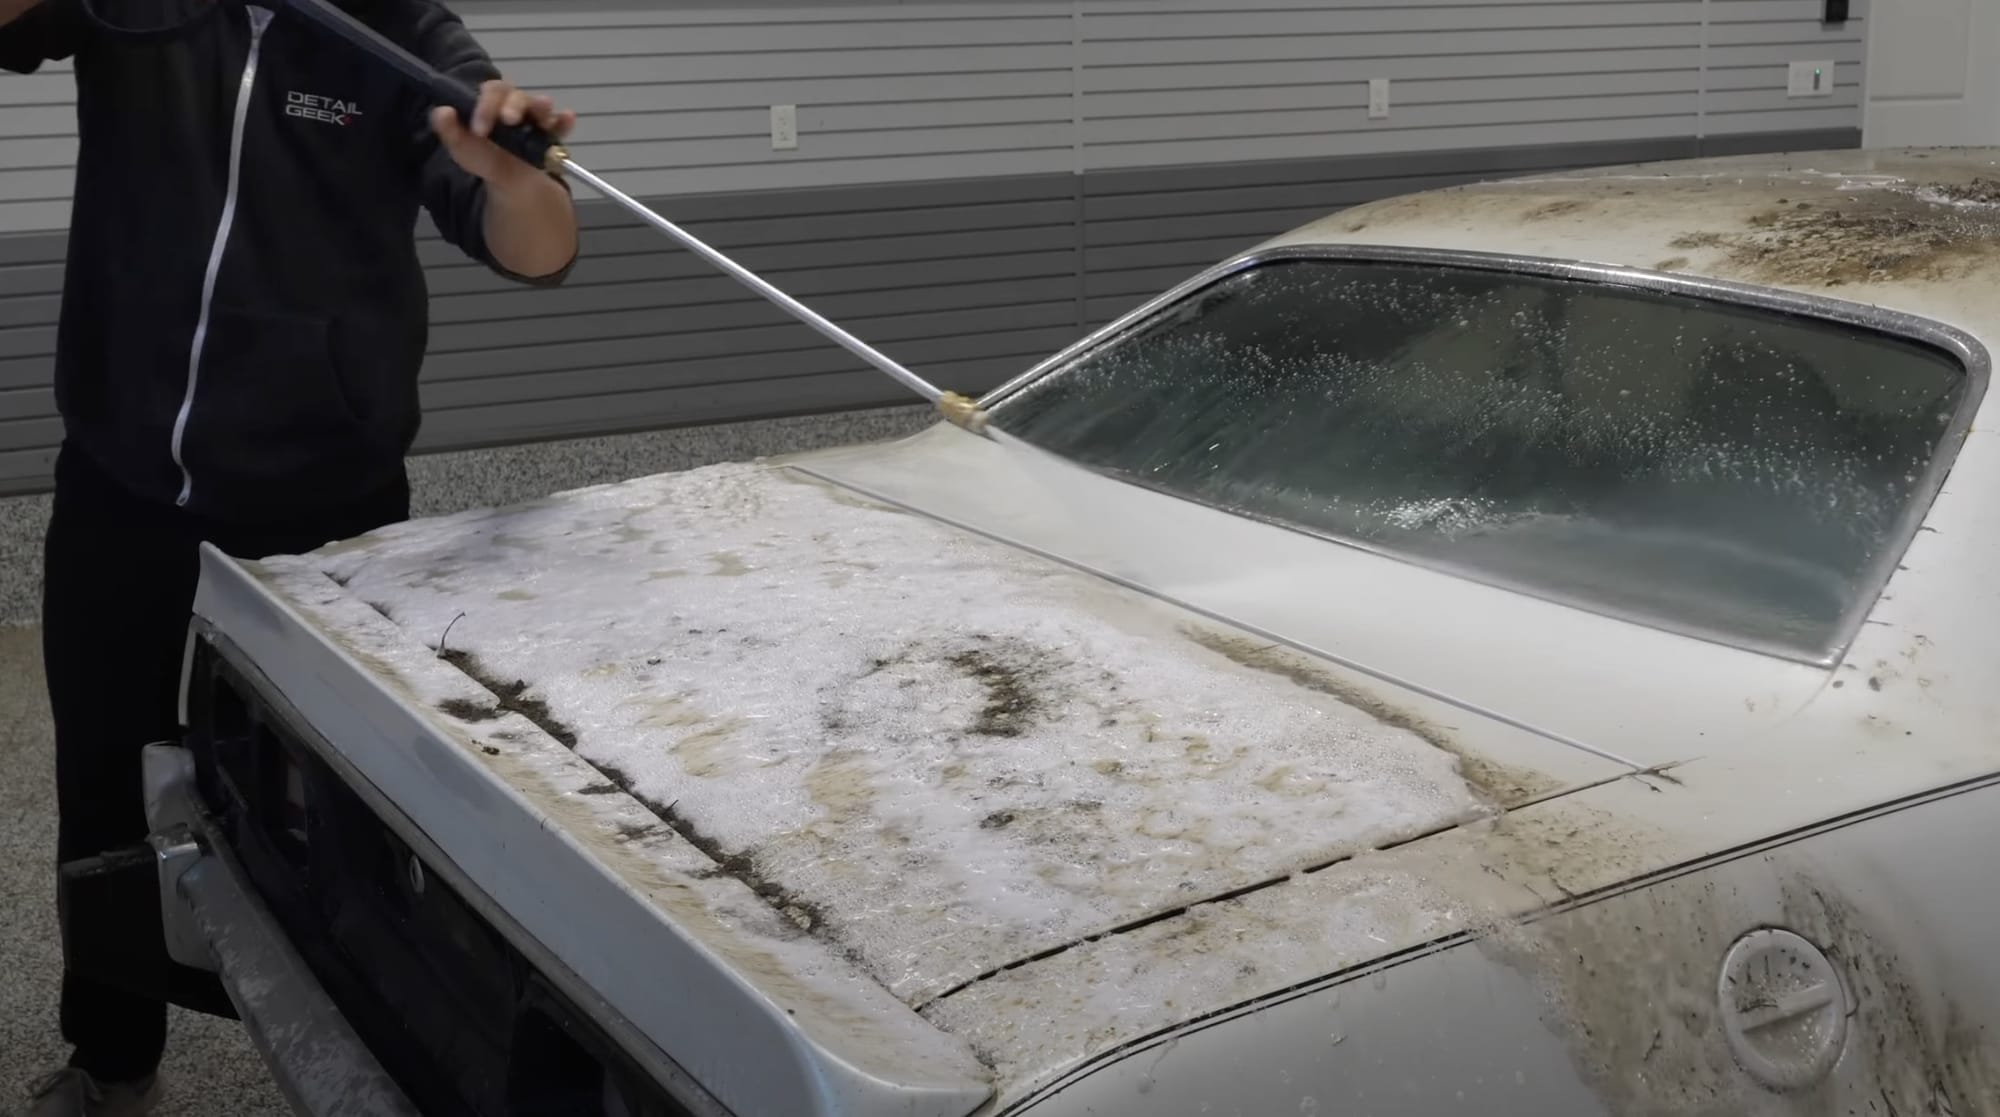 Son Resurrects 1974 Dodge Challenger After 30 Years of Neglect